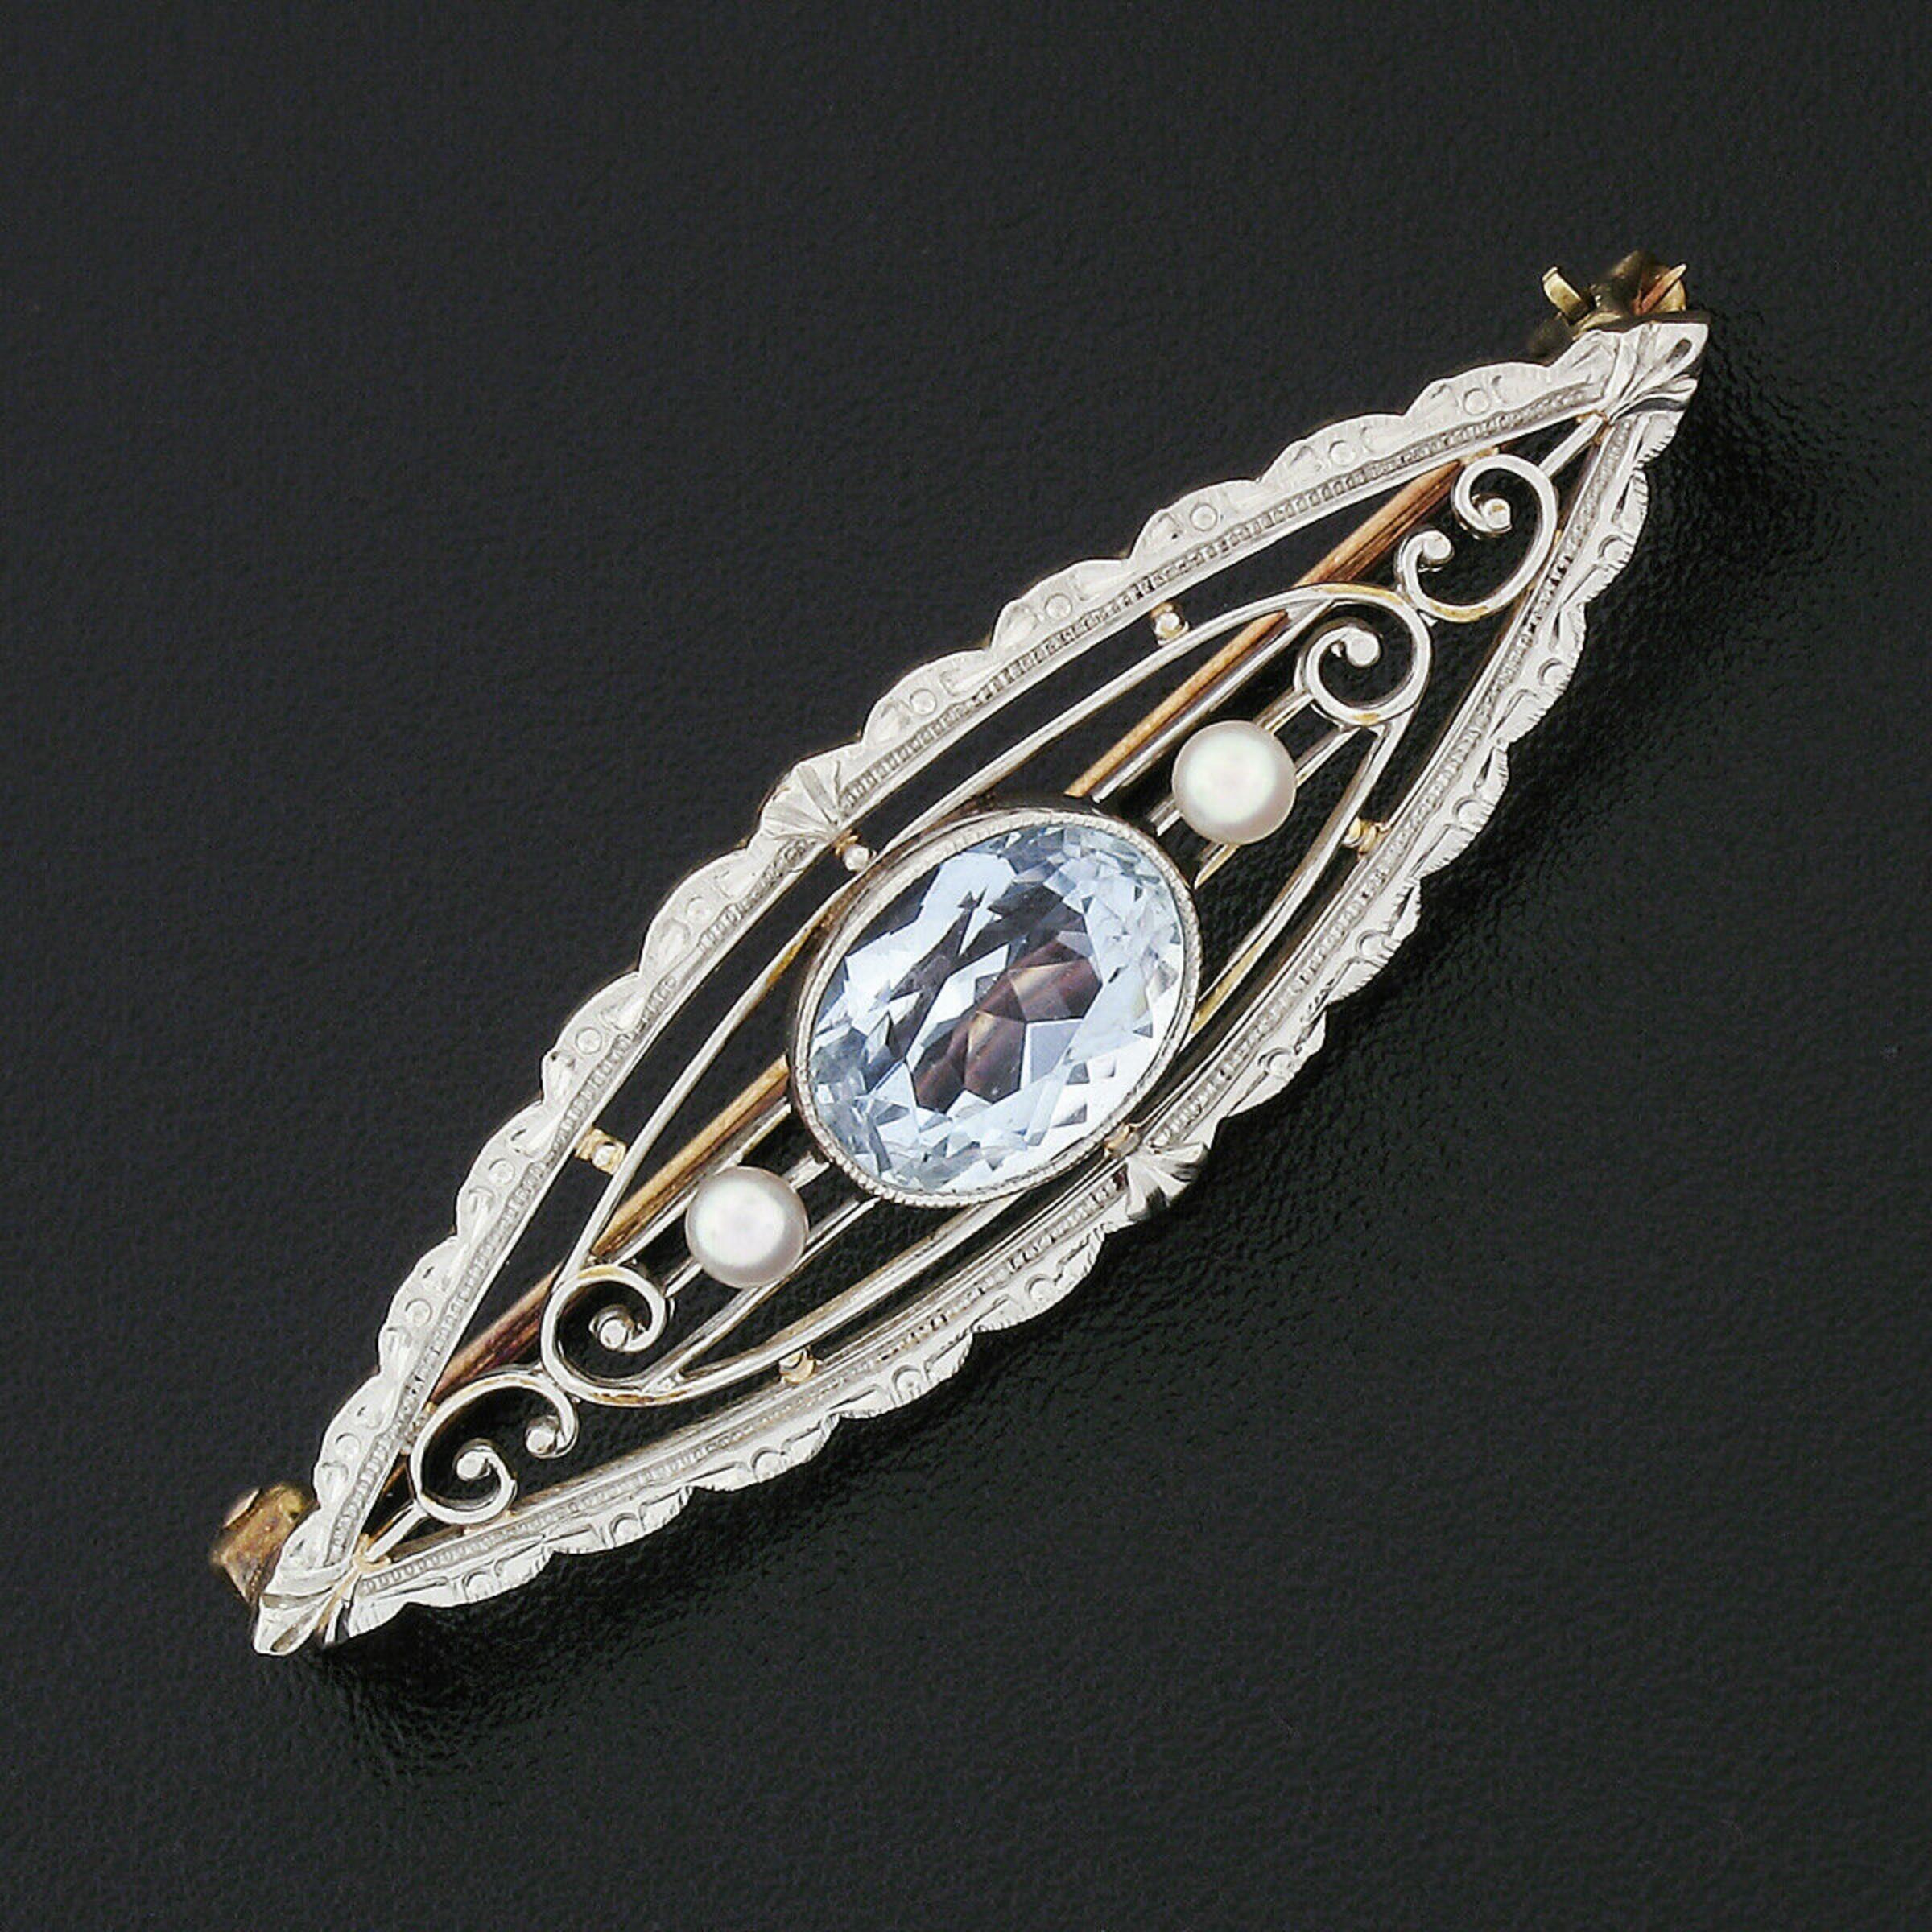 This beautiful Krementz antique pin/brooch was crafted in solid 14k yellow gold with a solid .900 platinum top during the art nouveau period and features an open, scalloped, marquise shape. The outer frame of the brooch is covered with beautiful